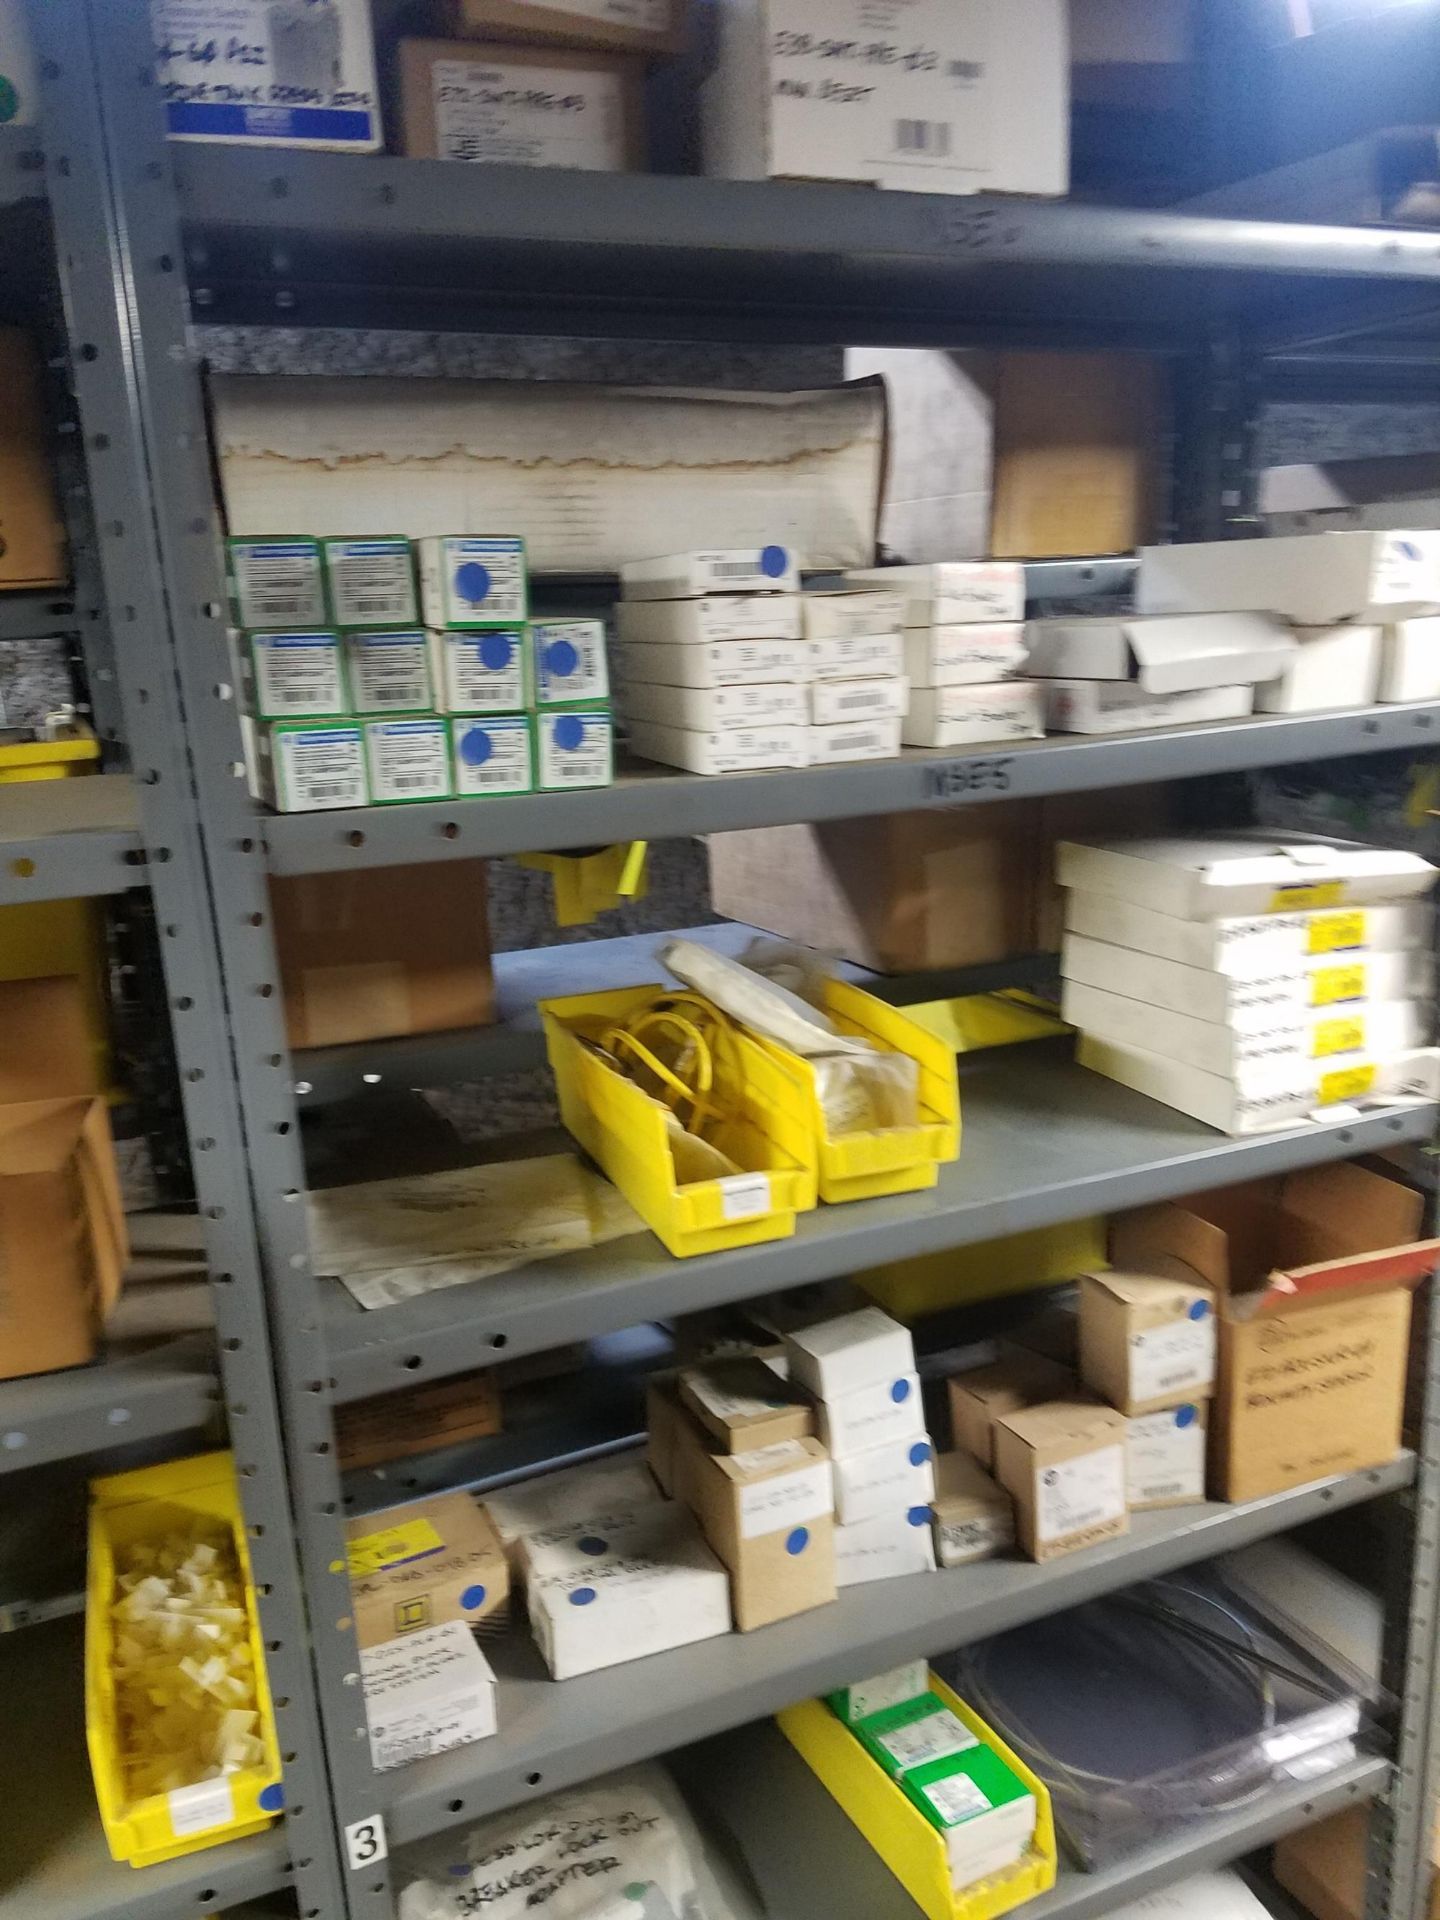 Contents of Spare Parts Storage Area On Mezzanine | Rig Fee: $400 - Image 15 of 19